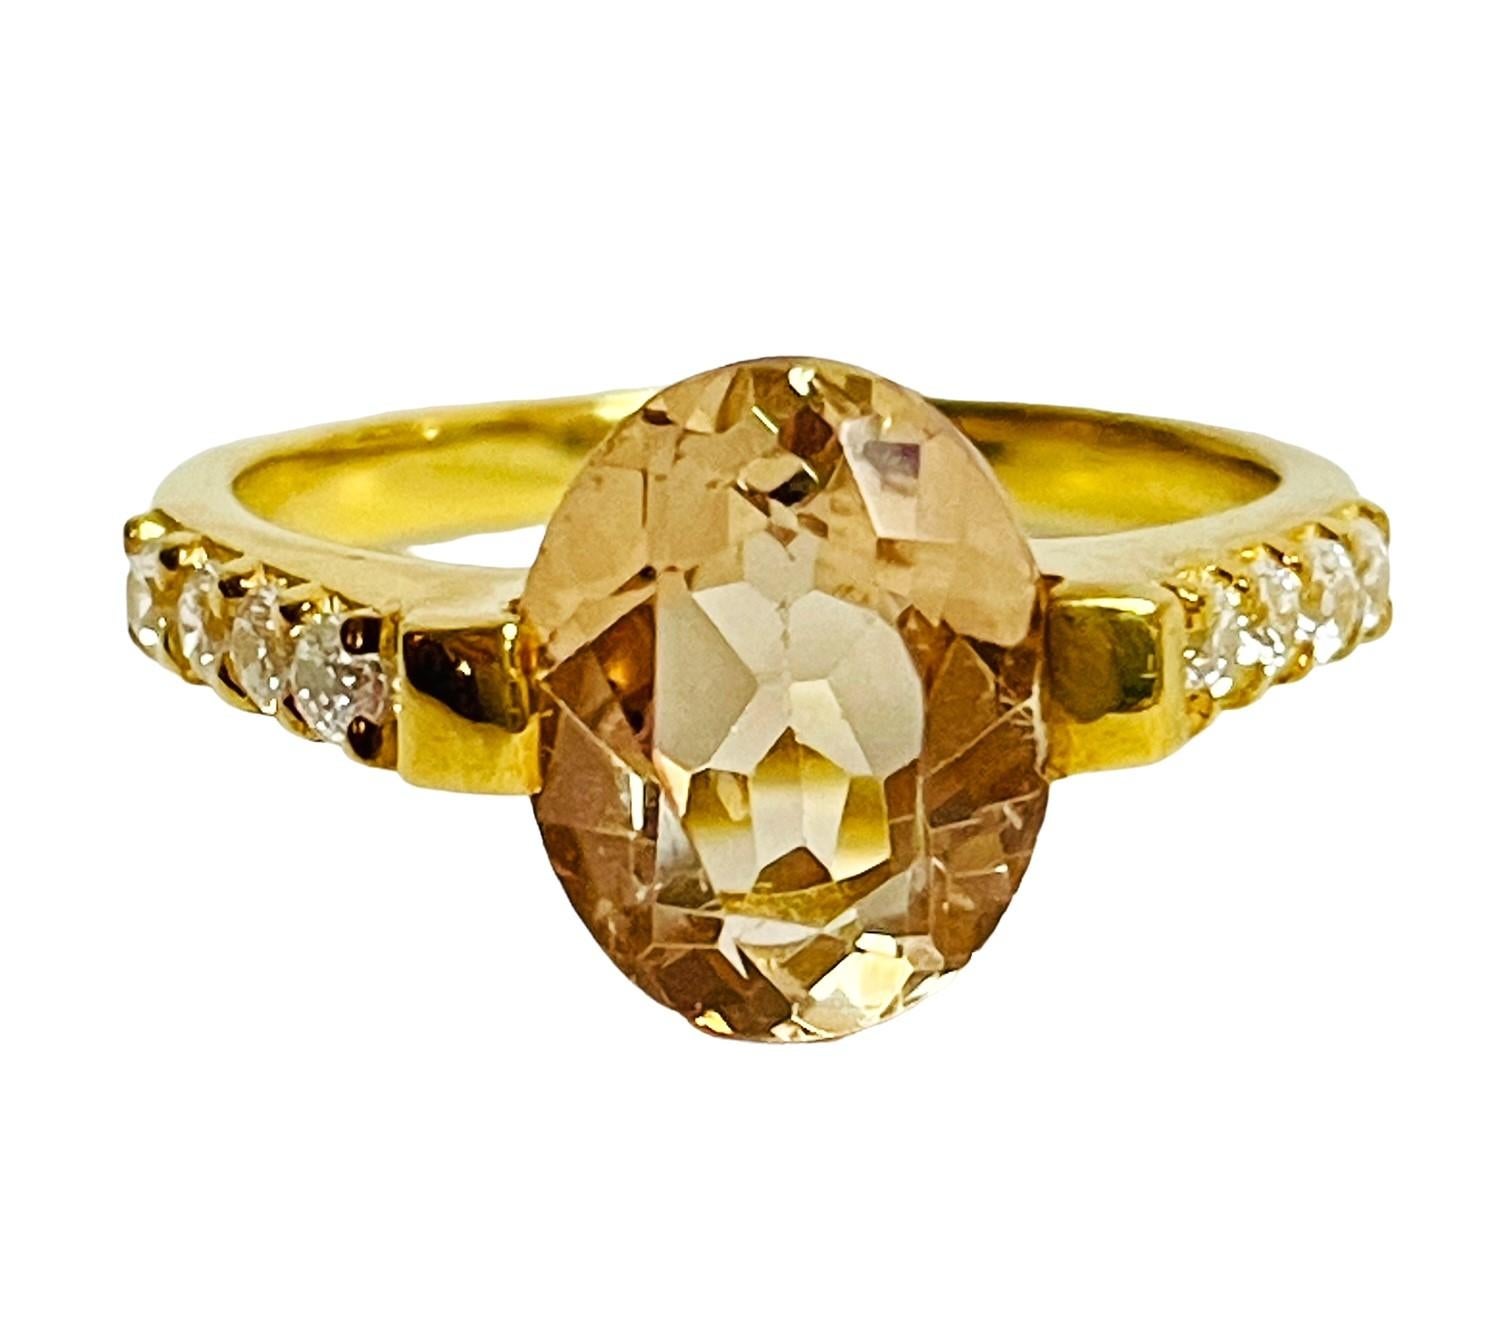 The ring is a size 6.25.  The setting is a beautiful 14k Yellow Gold Plate.  The main stone is natural and is 10 x 8 x 4.9 mm  Total carat weight is 3.4  The weight in Grams is 2.92.   I have many items on auction that have matching pieces.  Please